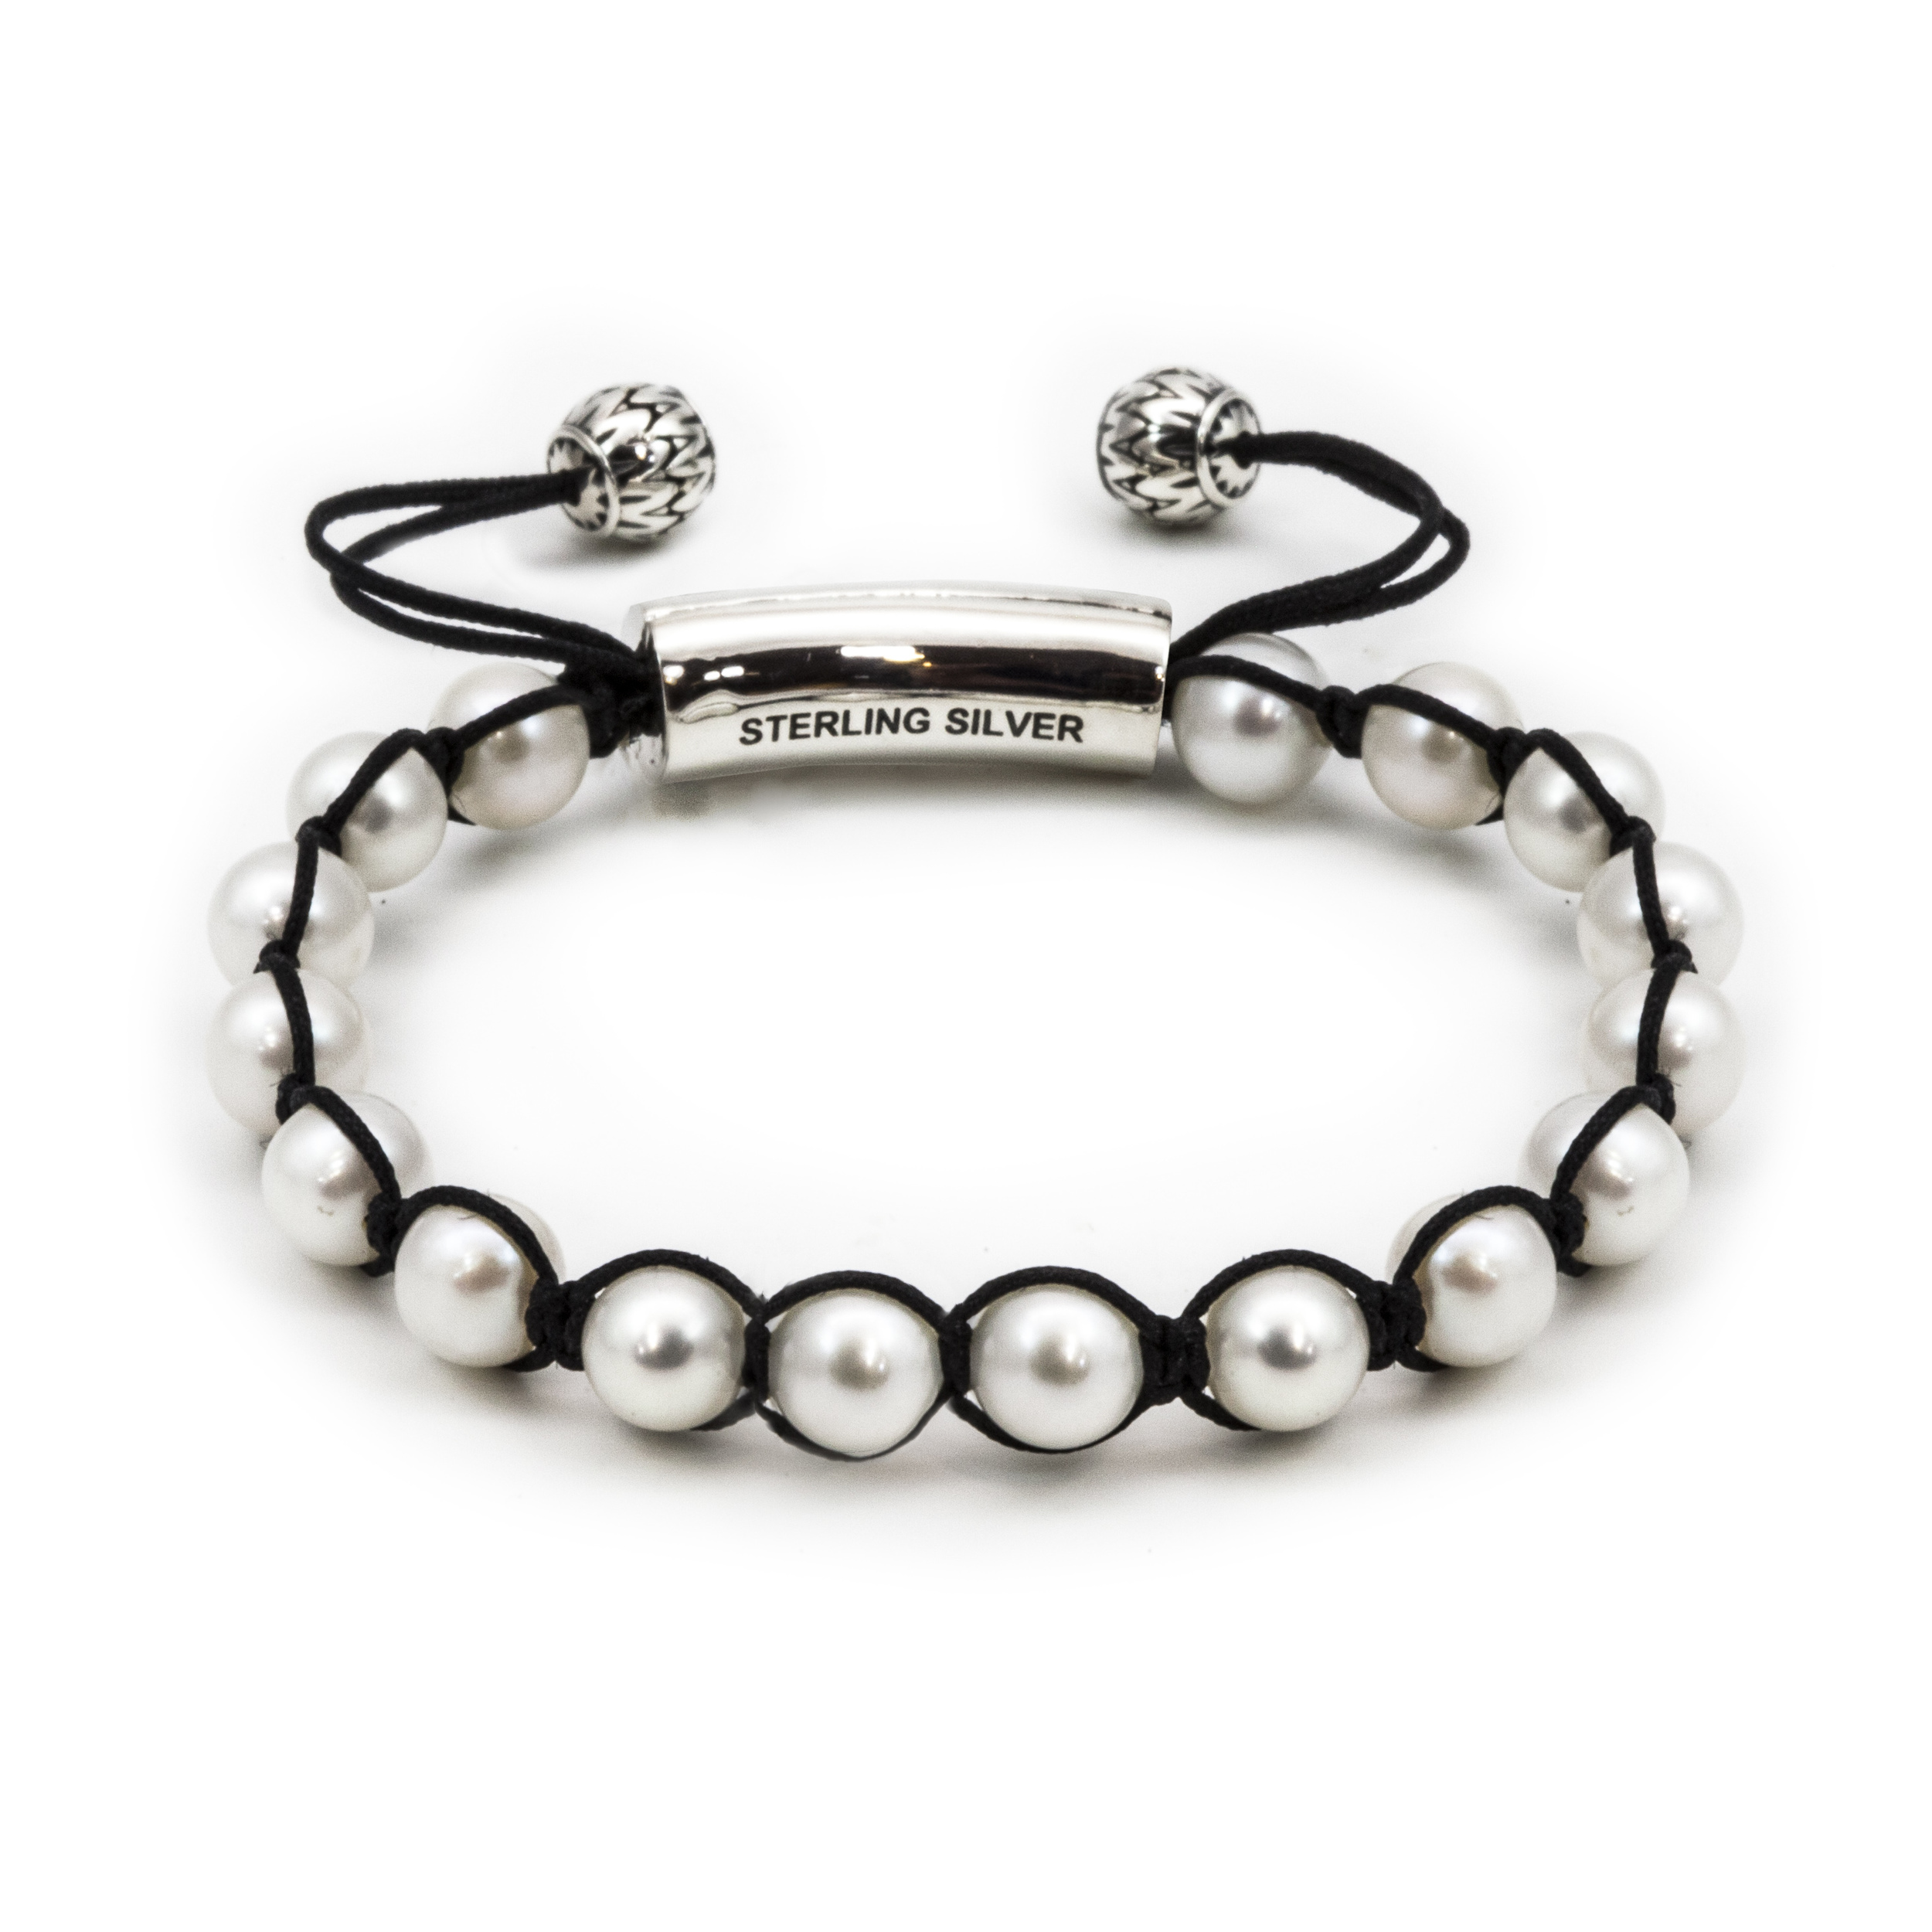 Details about   Women’s Black Leather Boho Bracelet With A Pearl And Silver Charm New